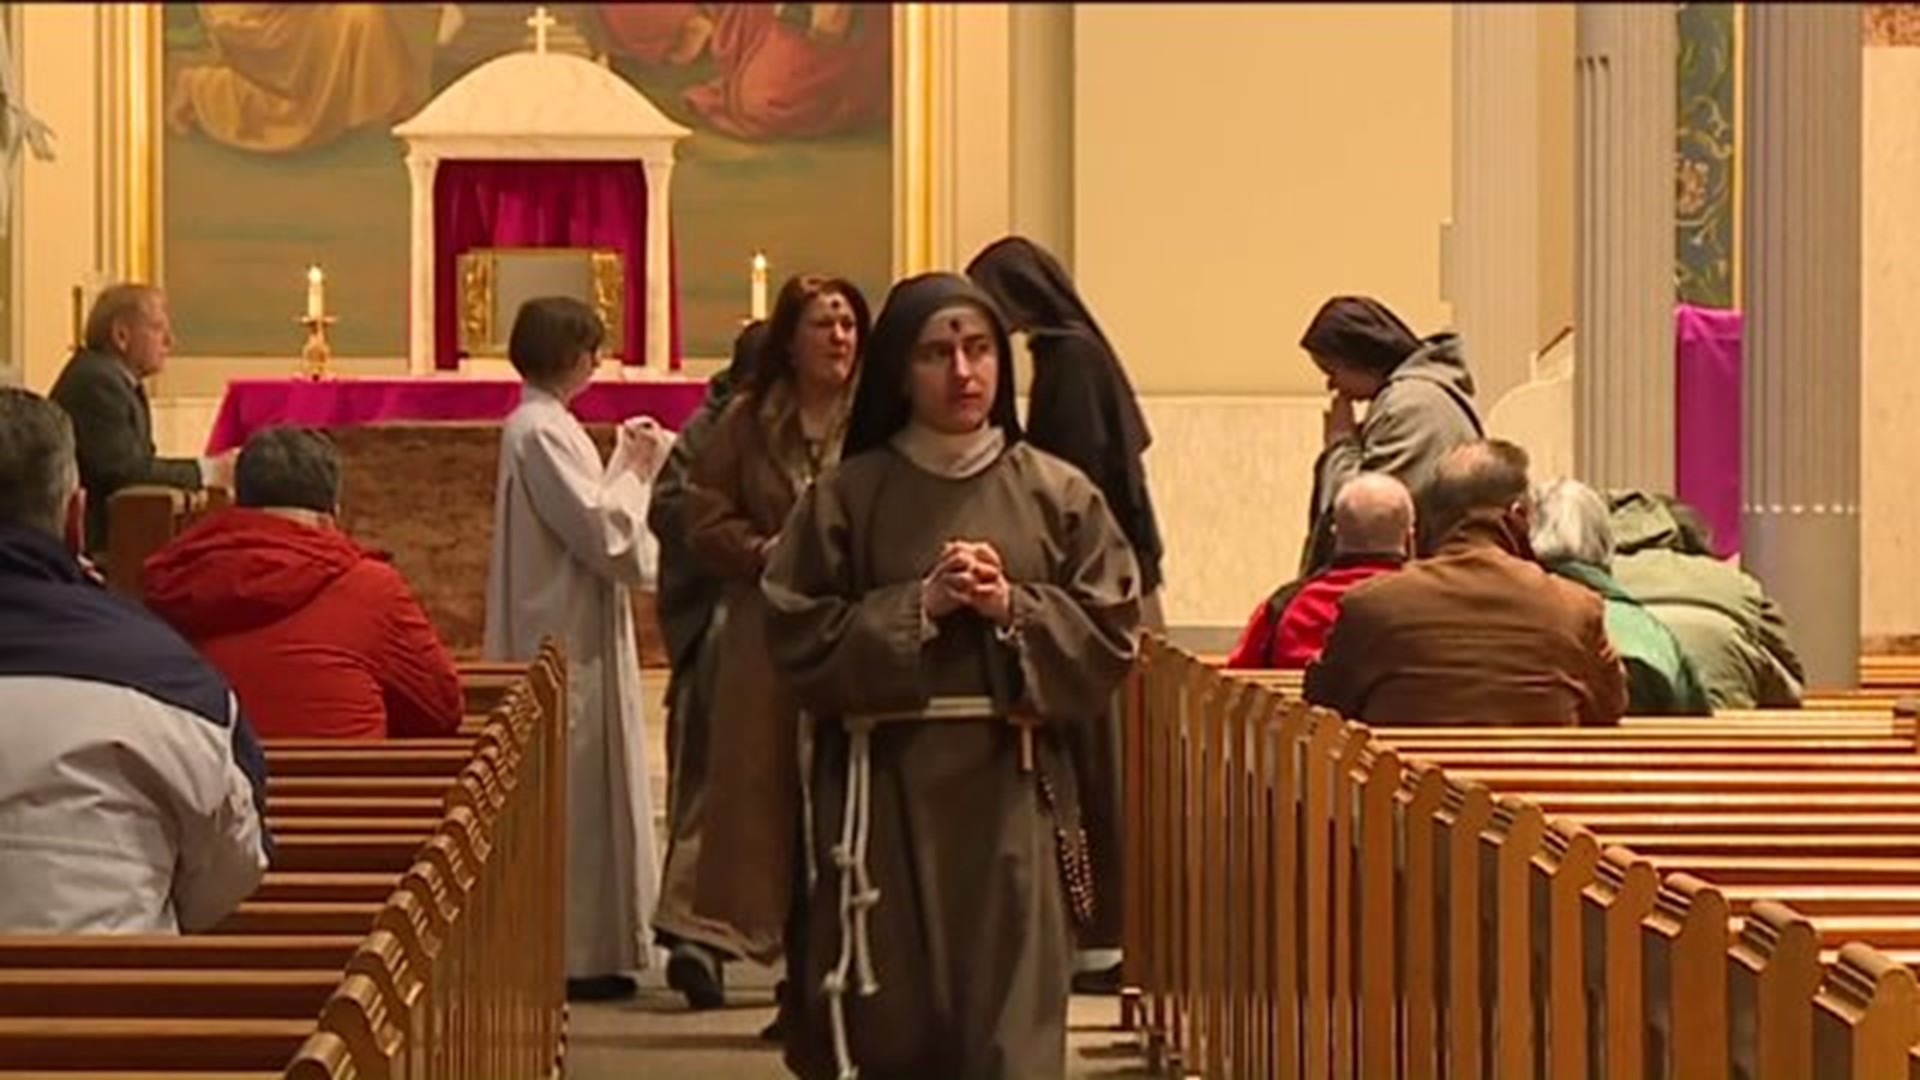 Christians Mark Beginning of Lent with Ash Wednesday